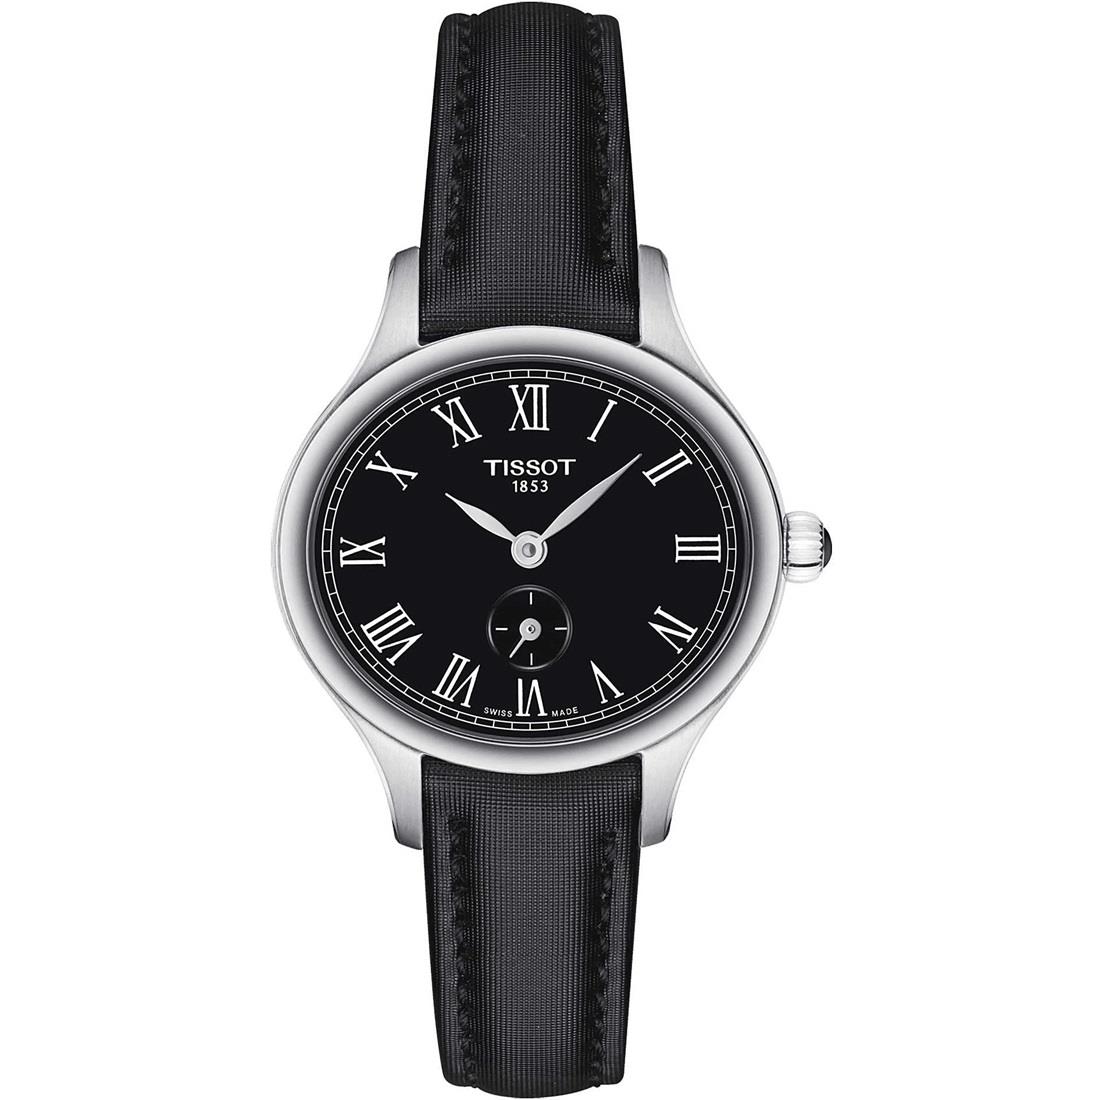 Women's steel watch with leather strap - TISSOT